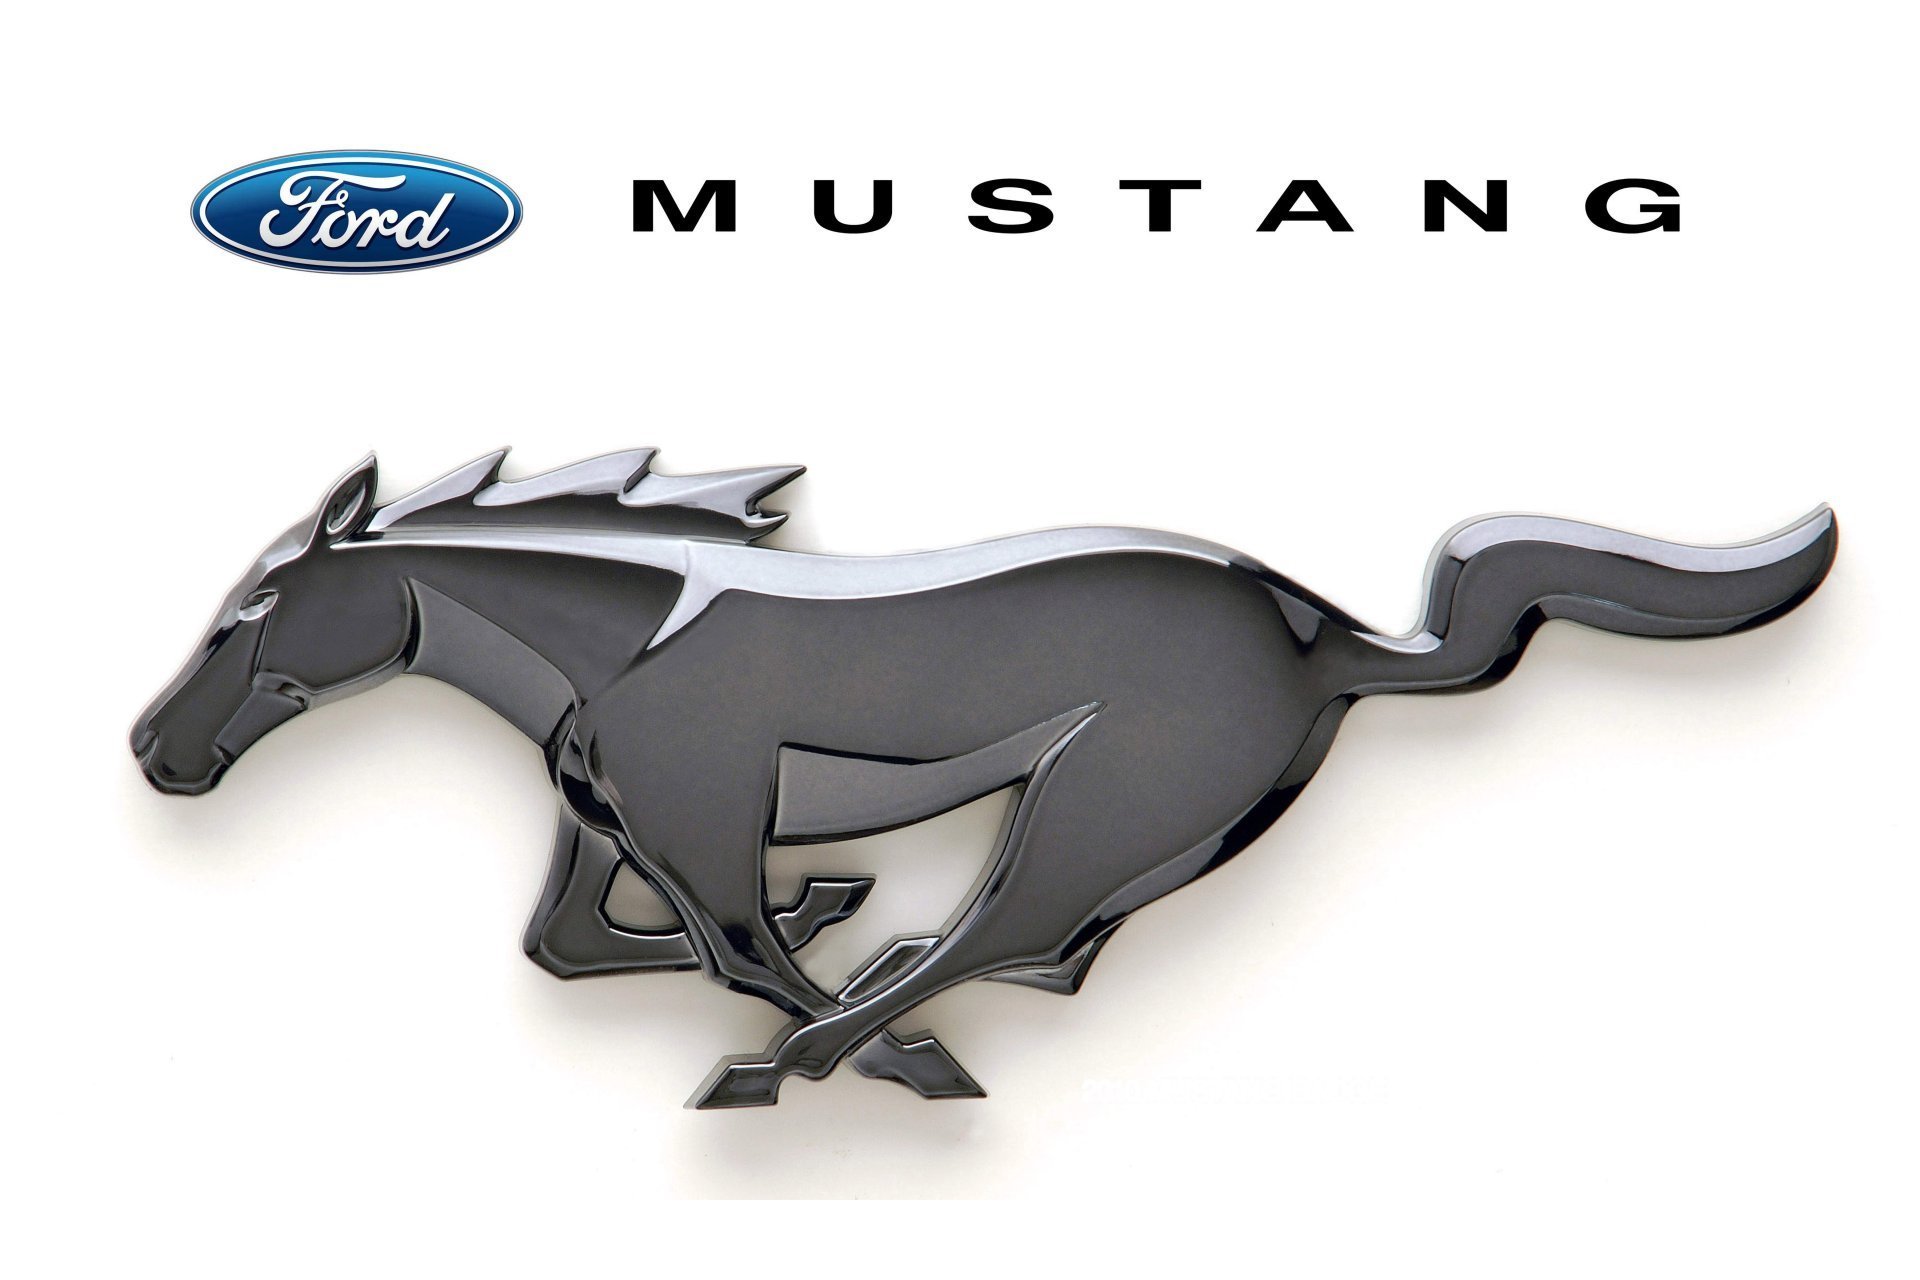 Mustang Logo Free Cliparts That You Can Download To You Computer And